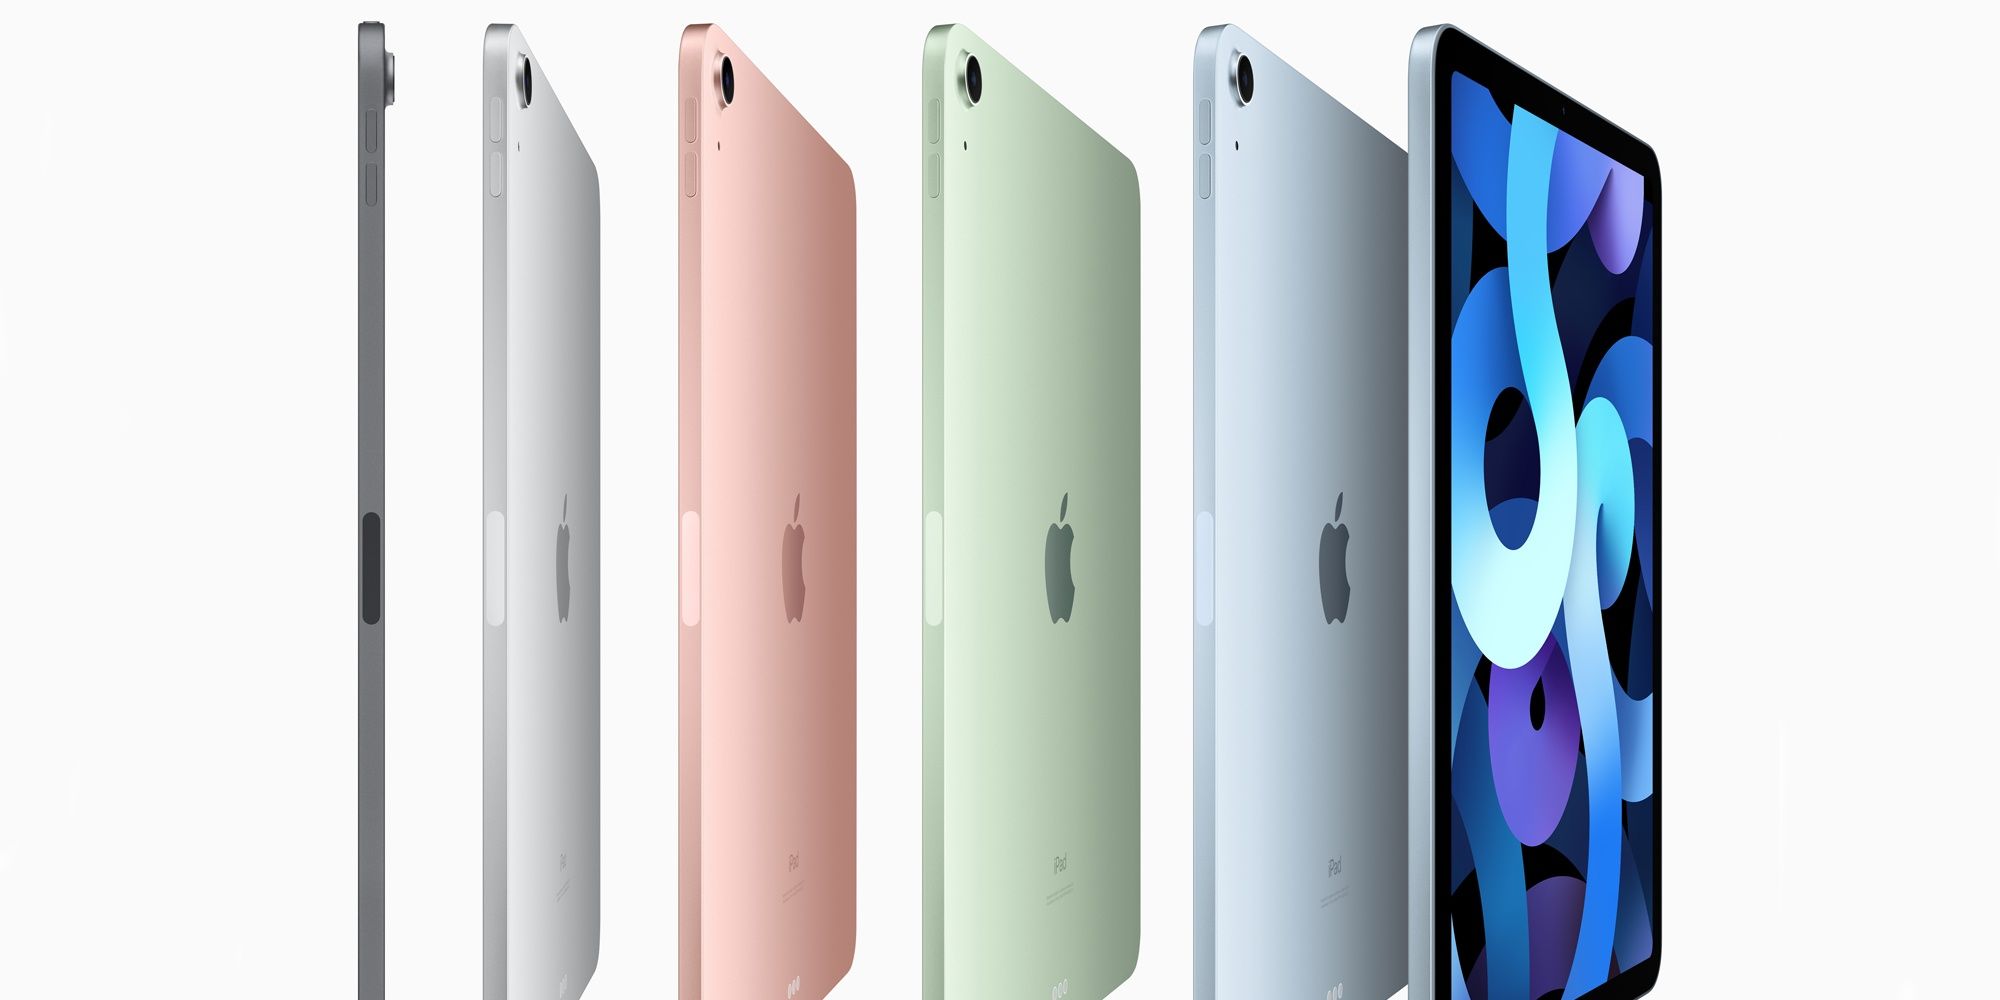 iPad Air in all available colors